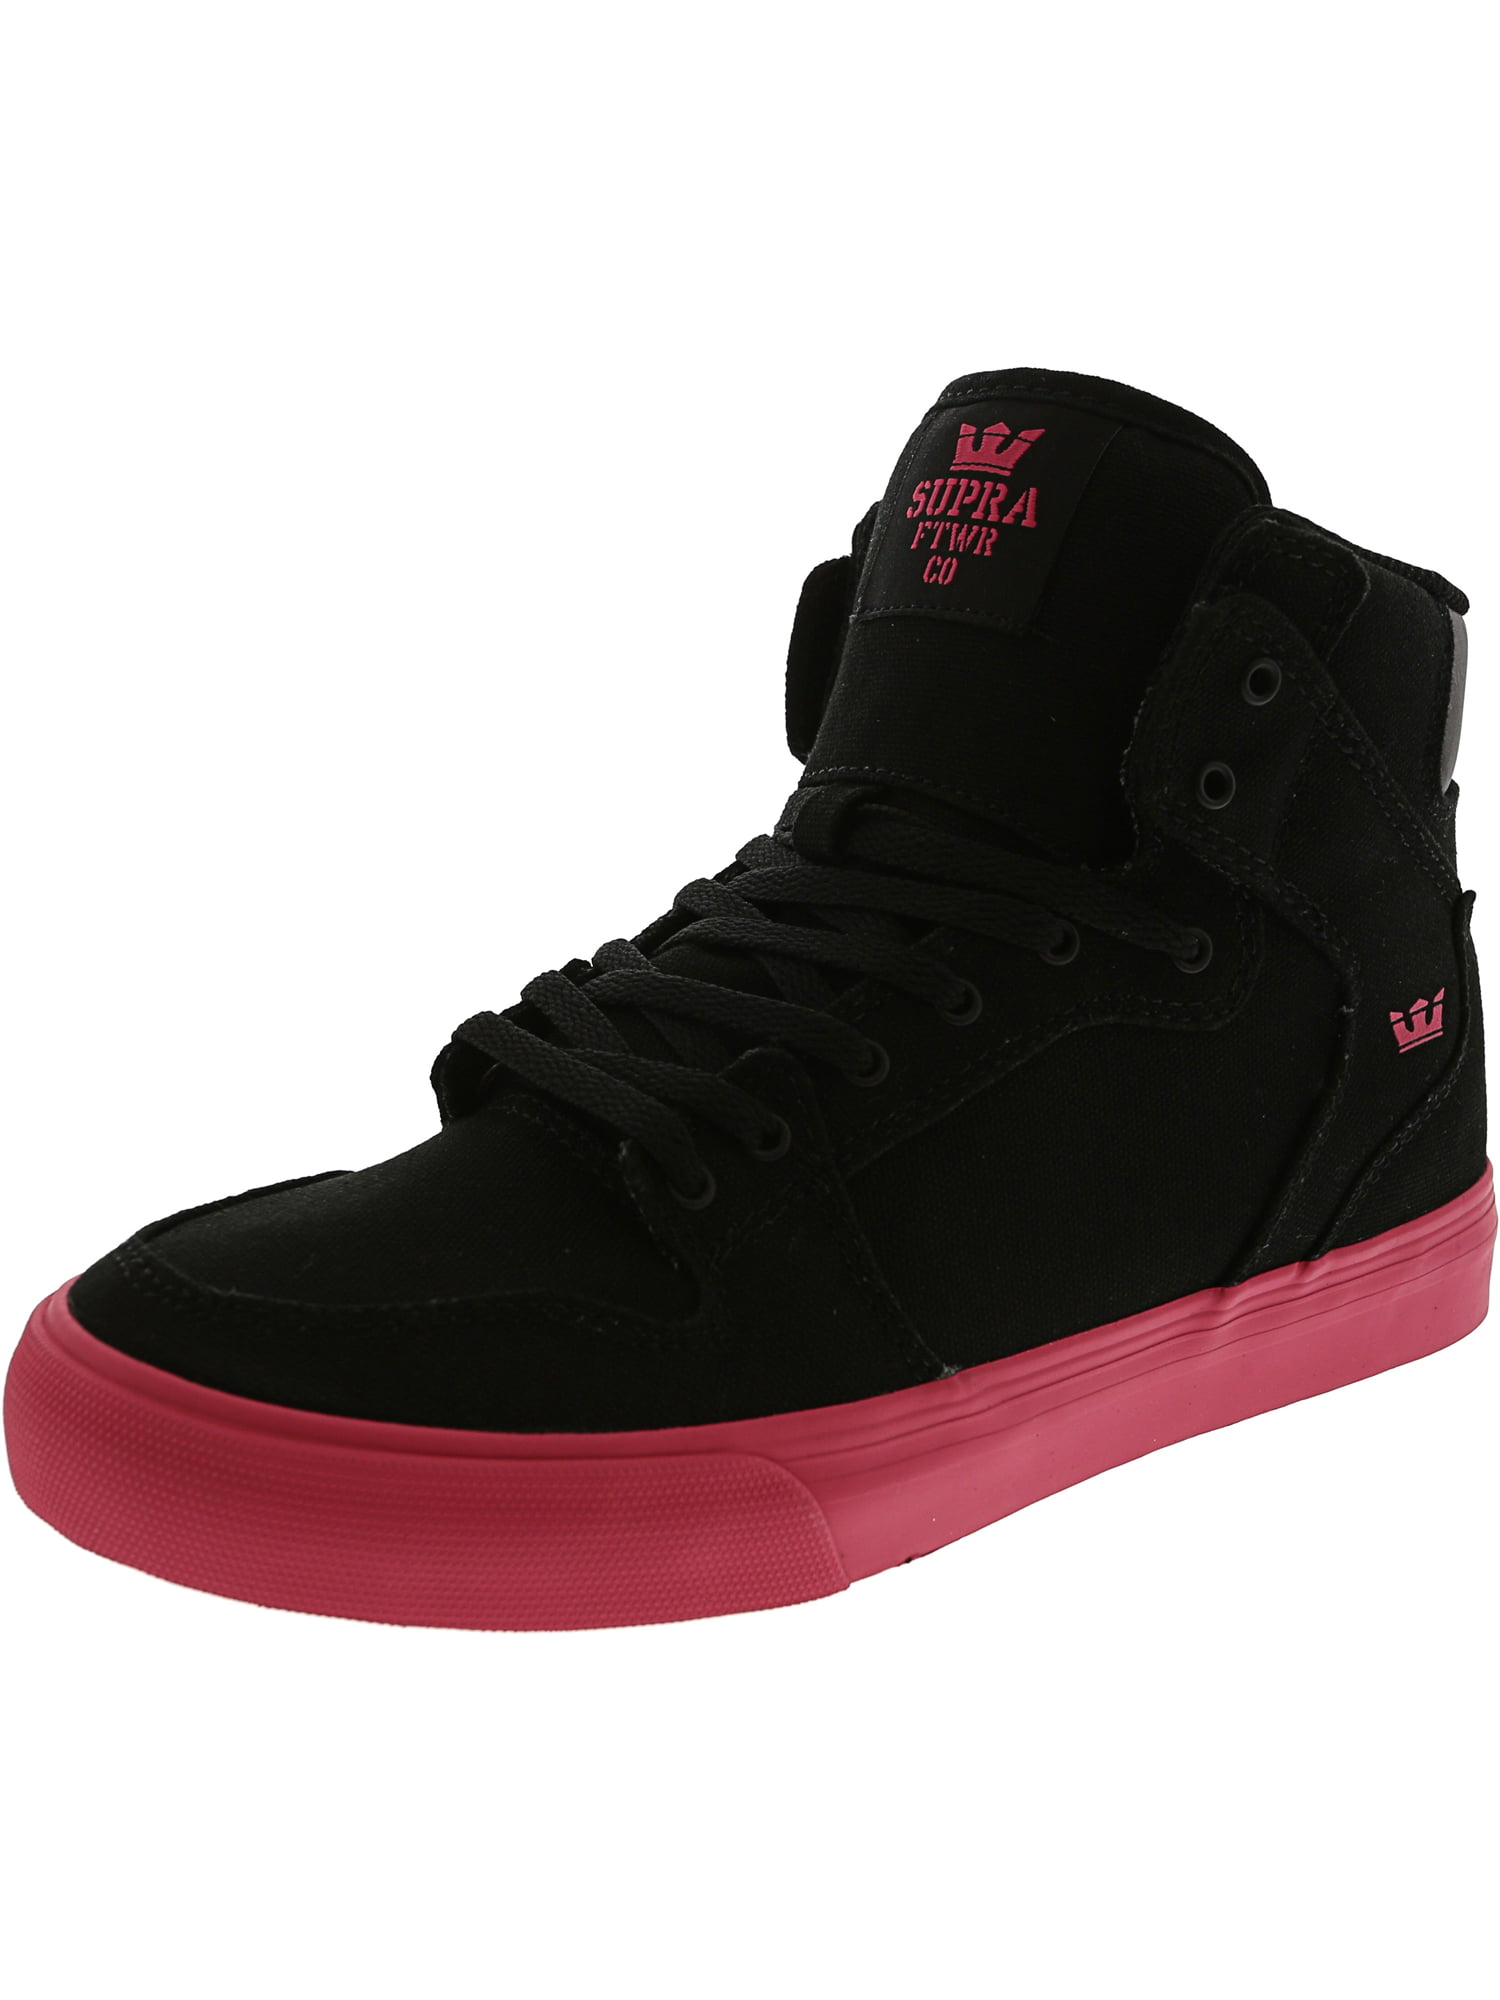 hot pink high top shoes